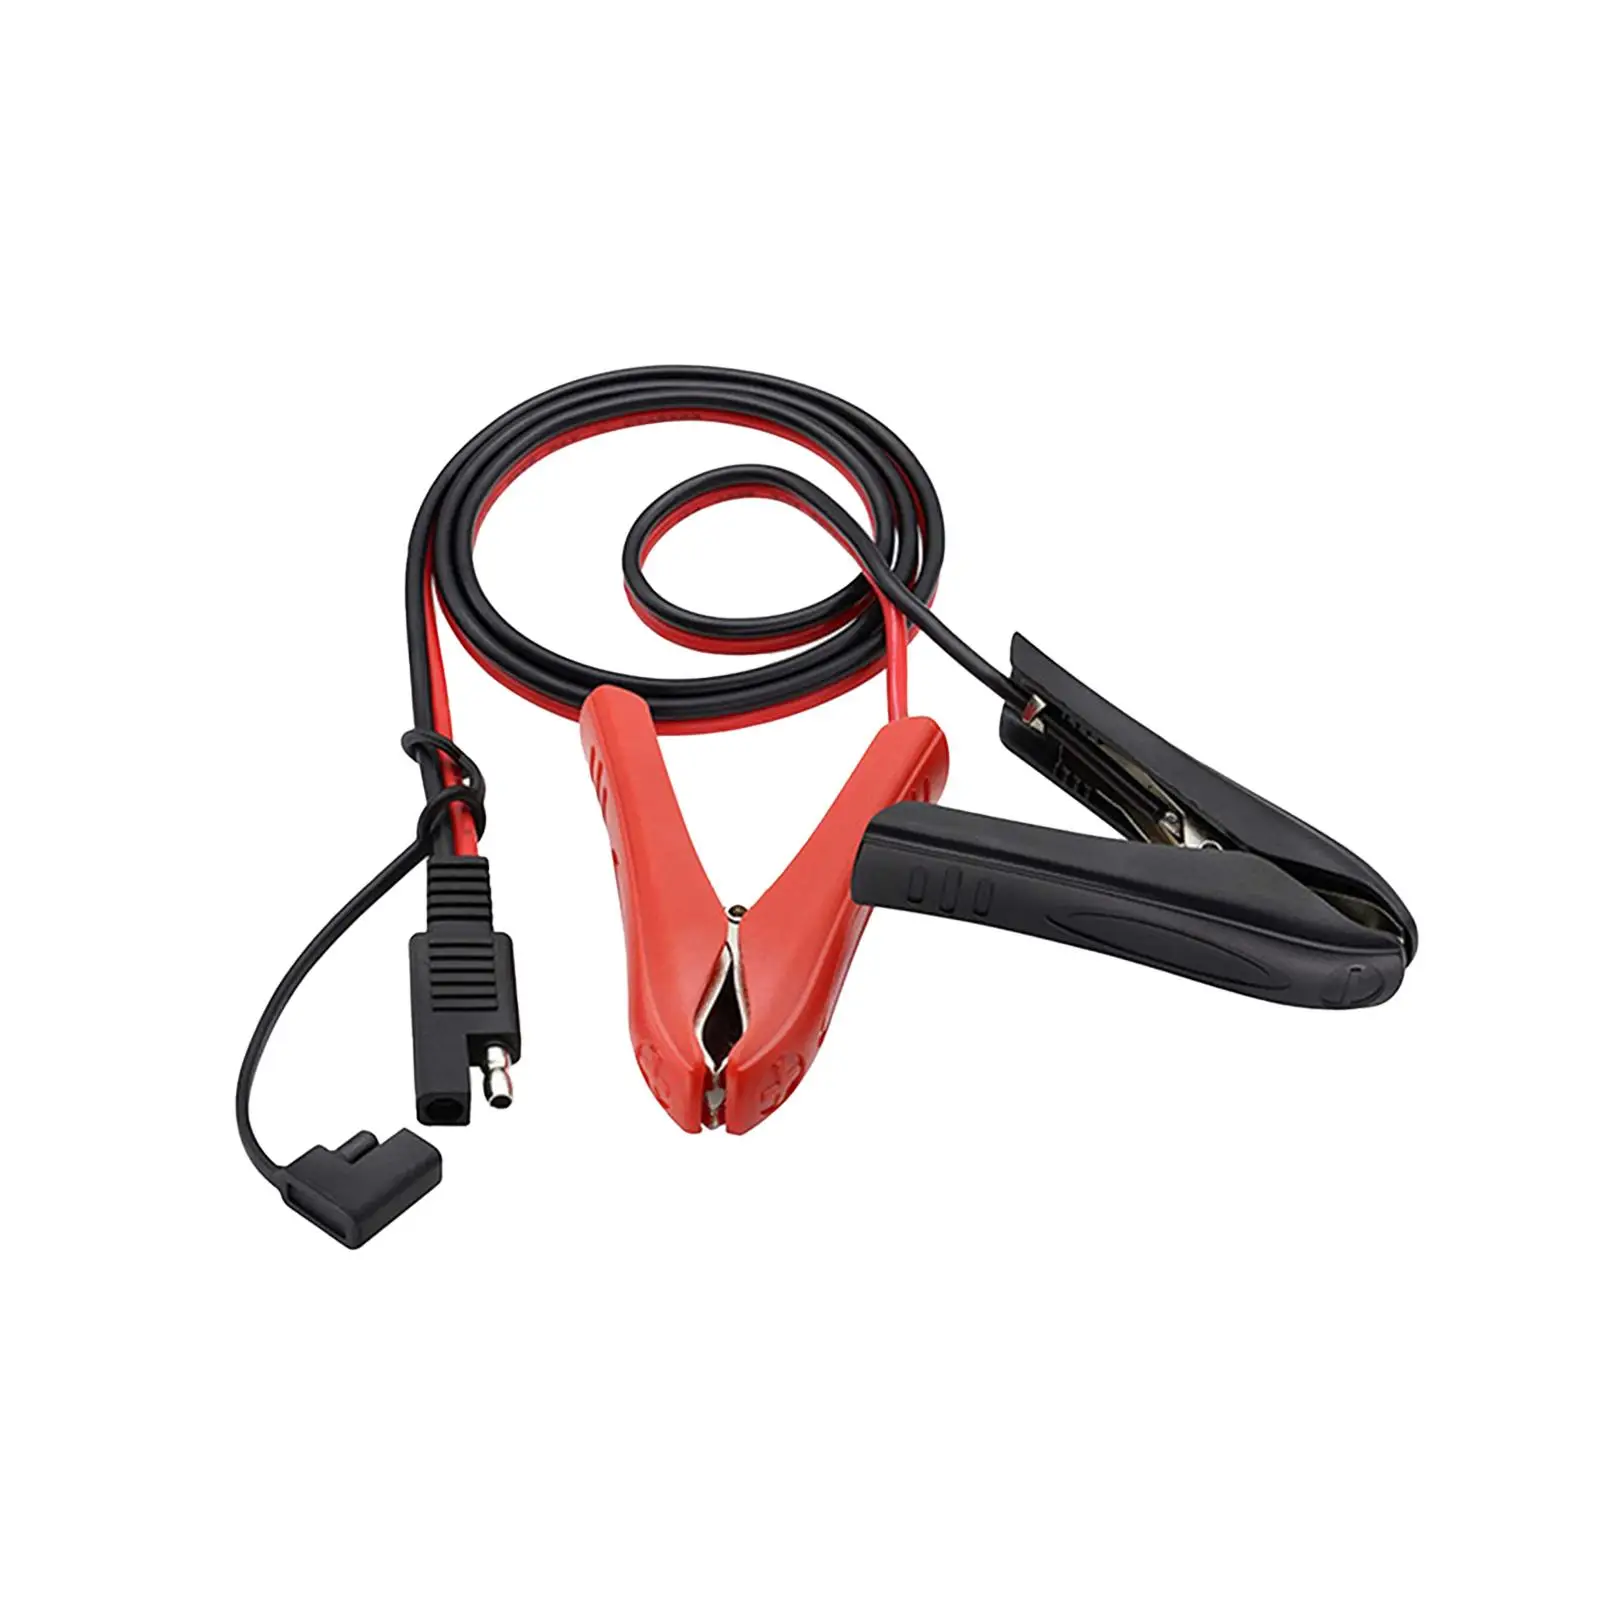 SAE to Alligator Clip Power Cord Quick Disconnect Convenient with Dust Cover Connector Cord for Vehicle